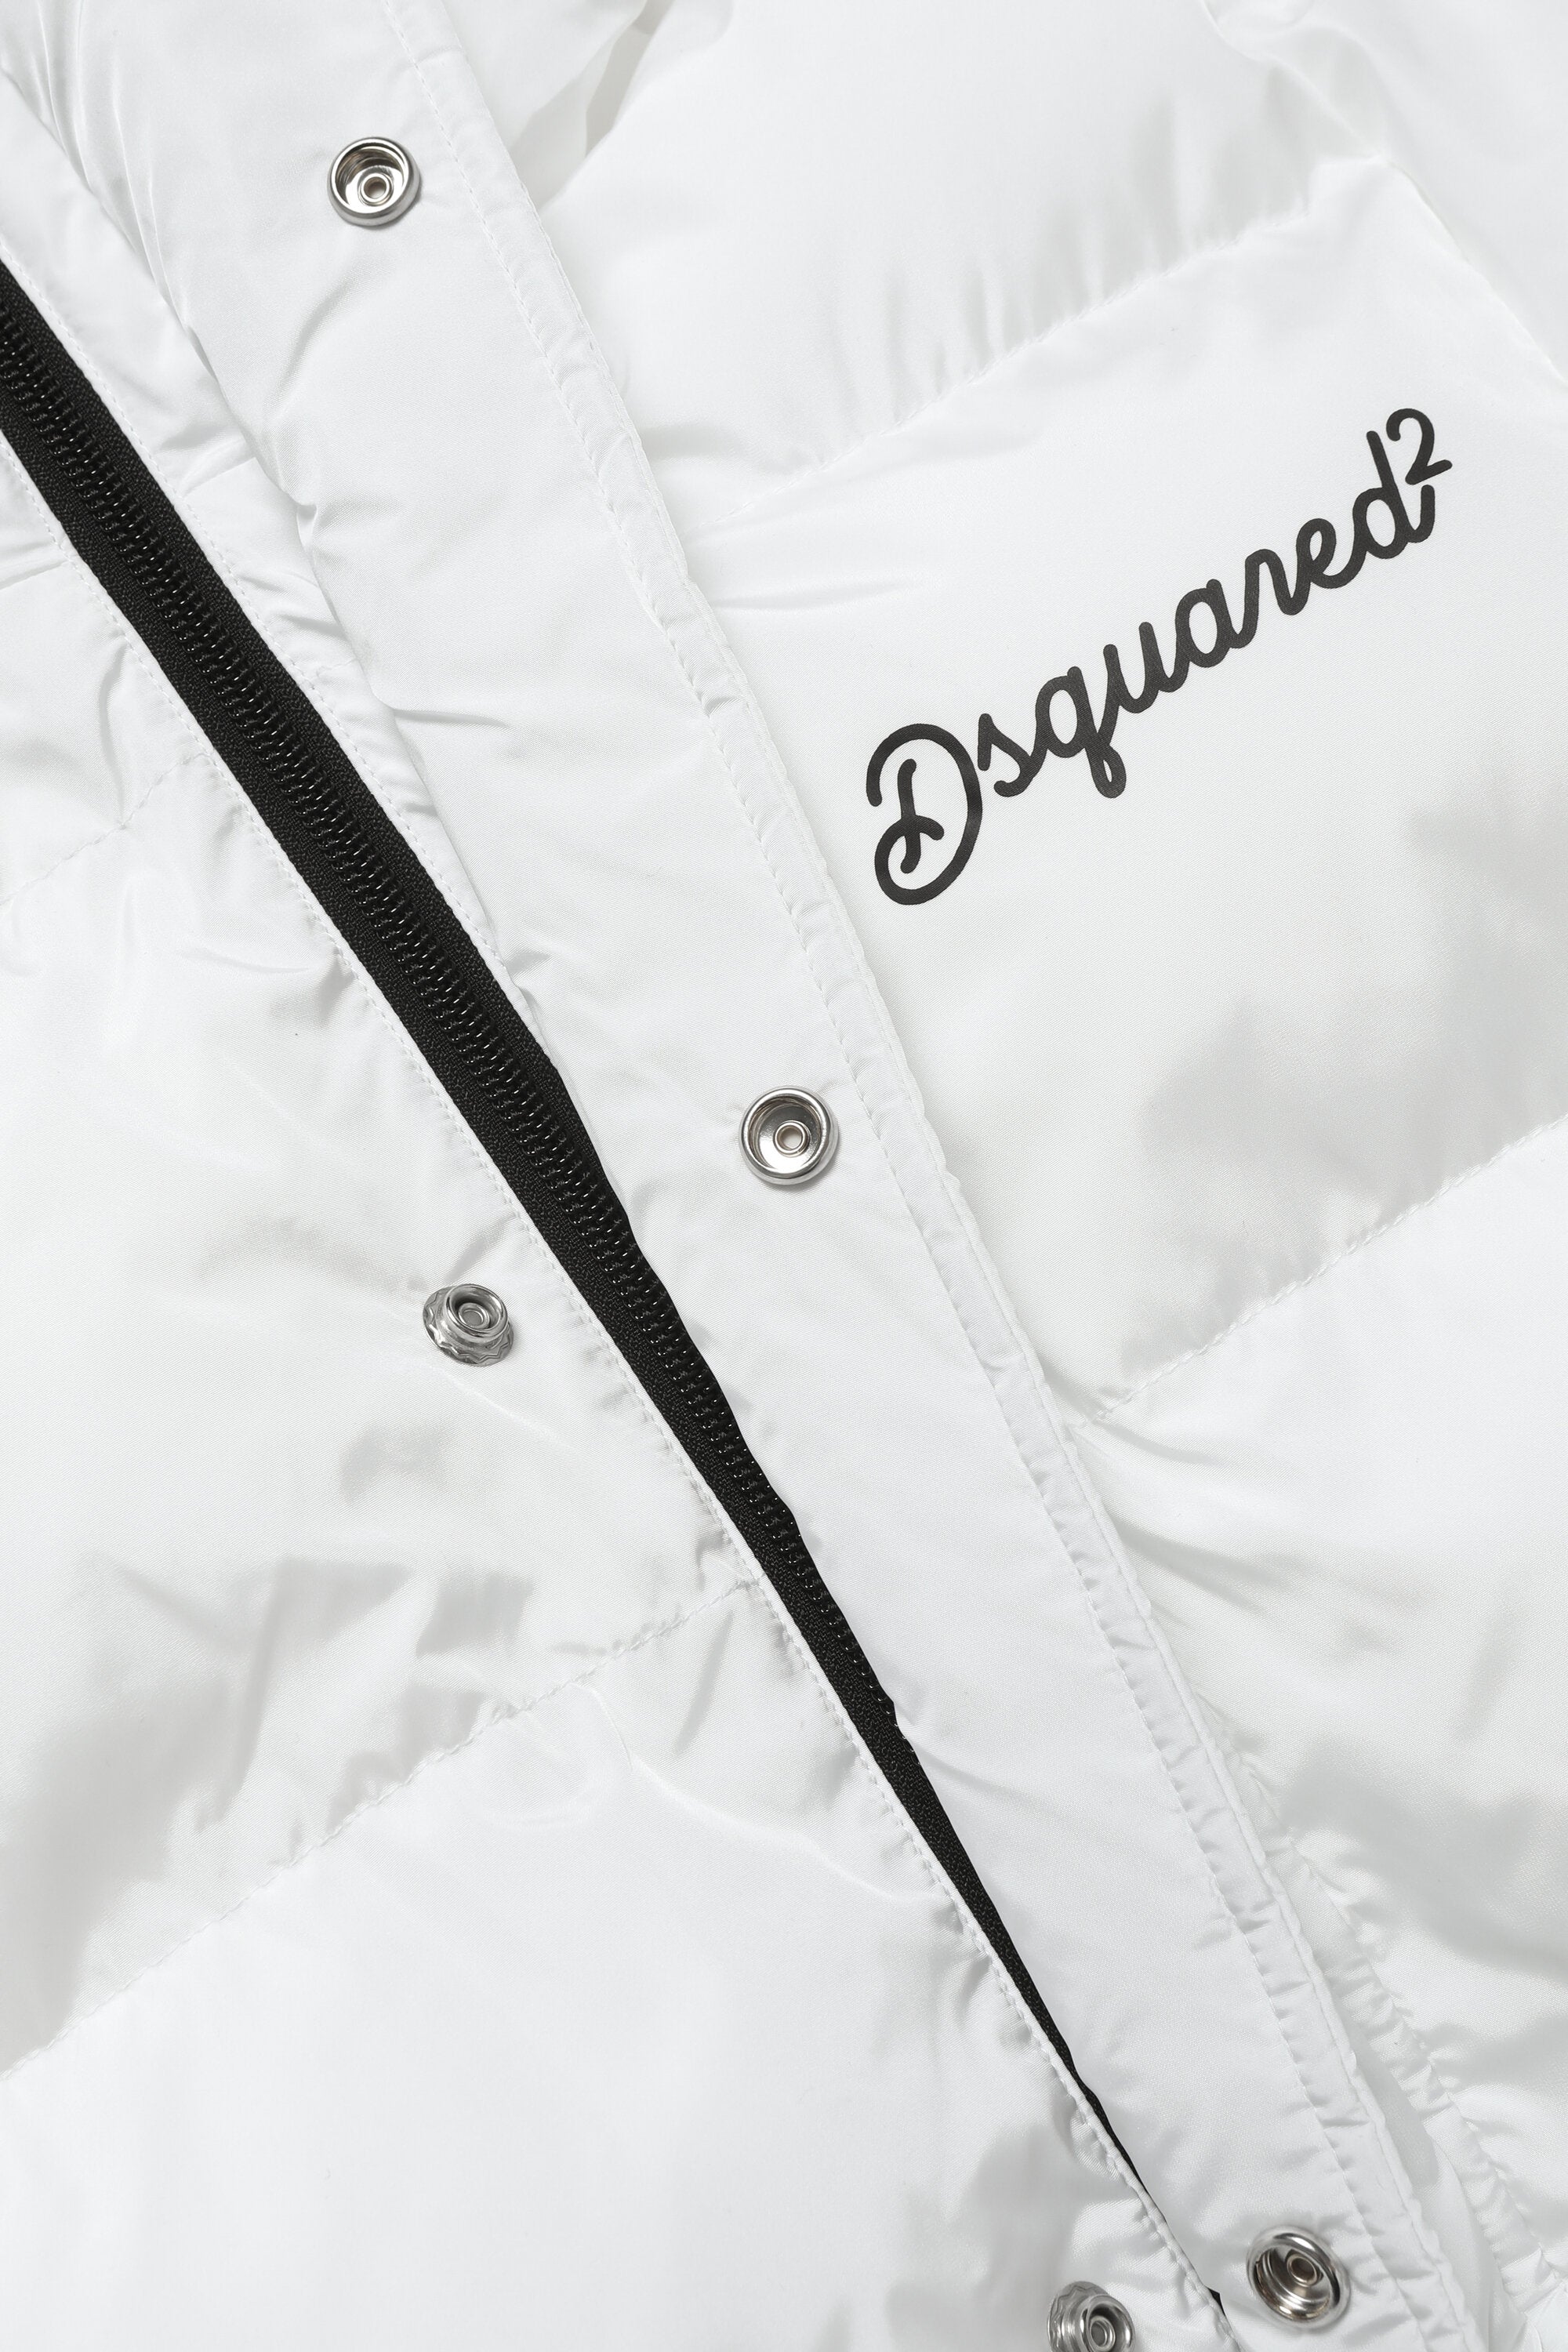 Glossy hooded padded jacket with cursive logo